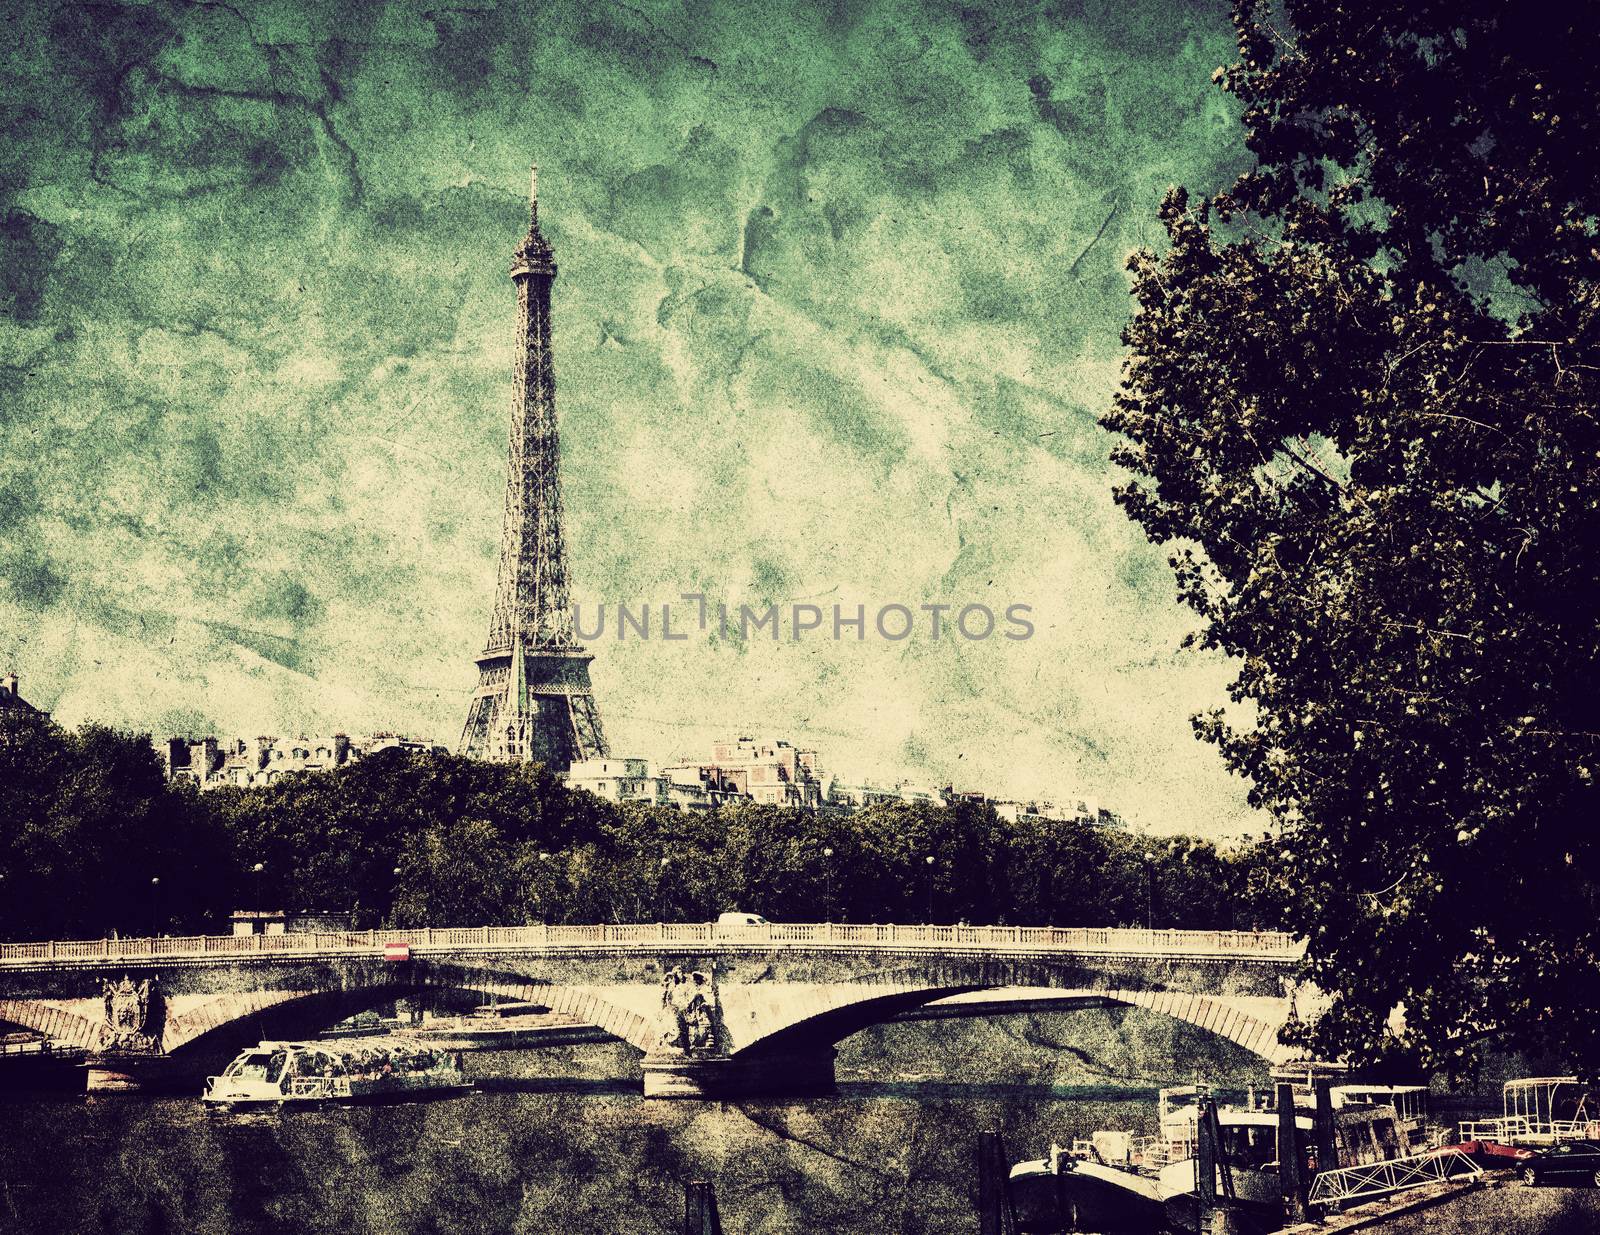 Eiffel Tower and bridge on Seine river in Paris, France. View from Alexandre Bridge in vintage, retro style